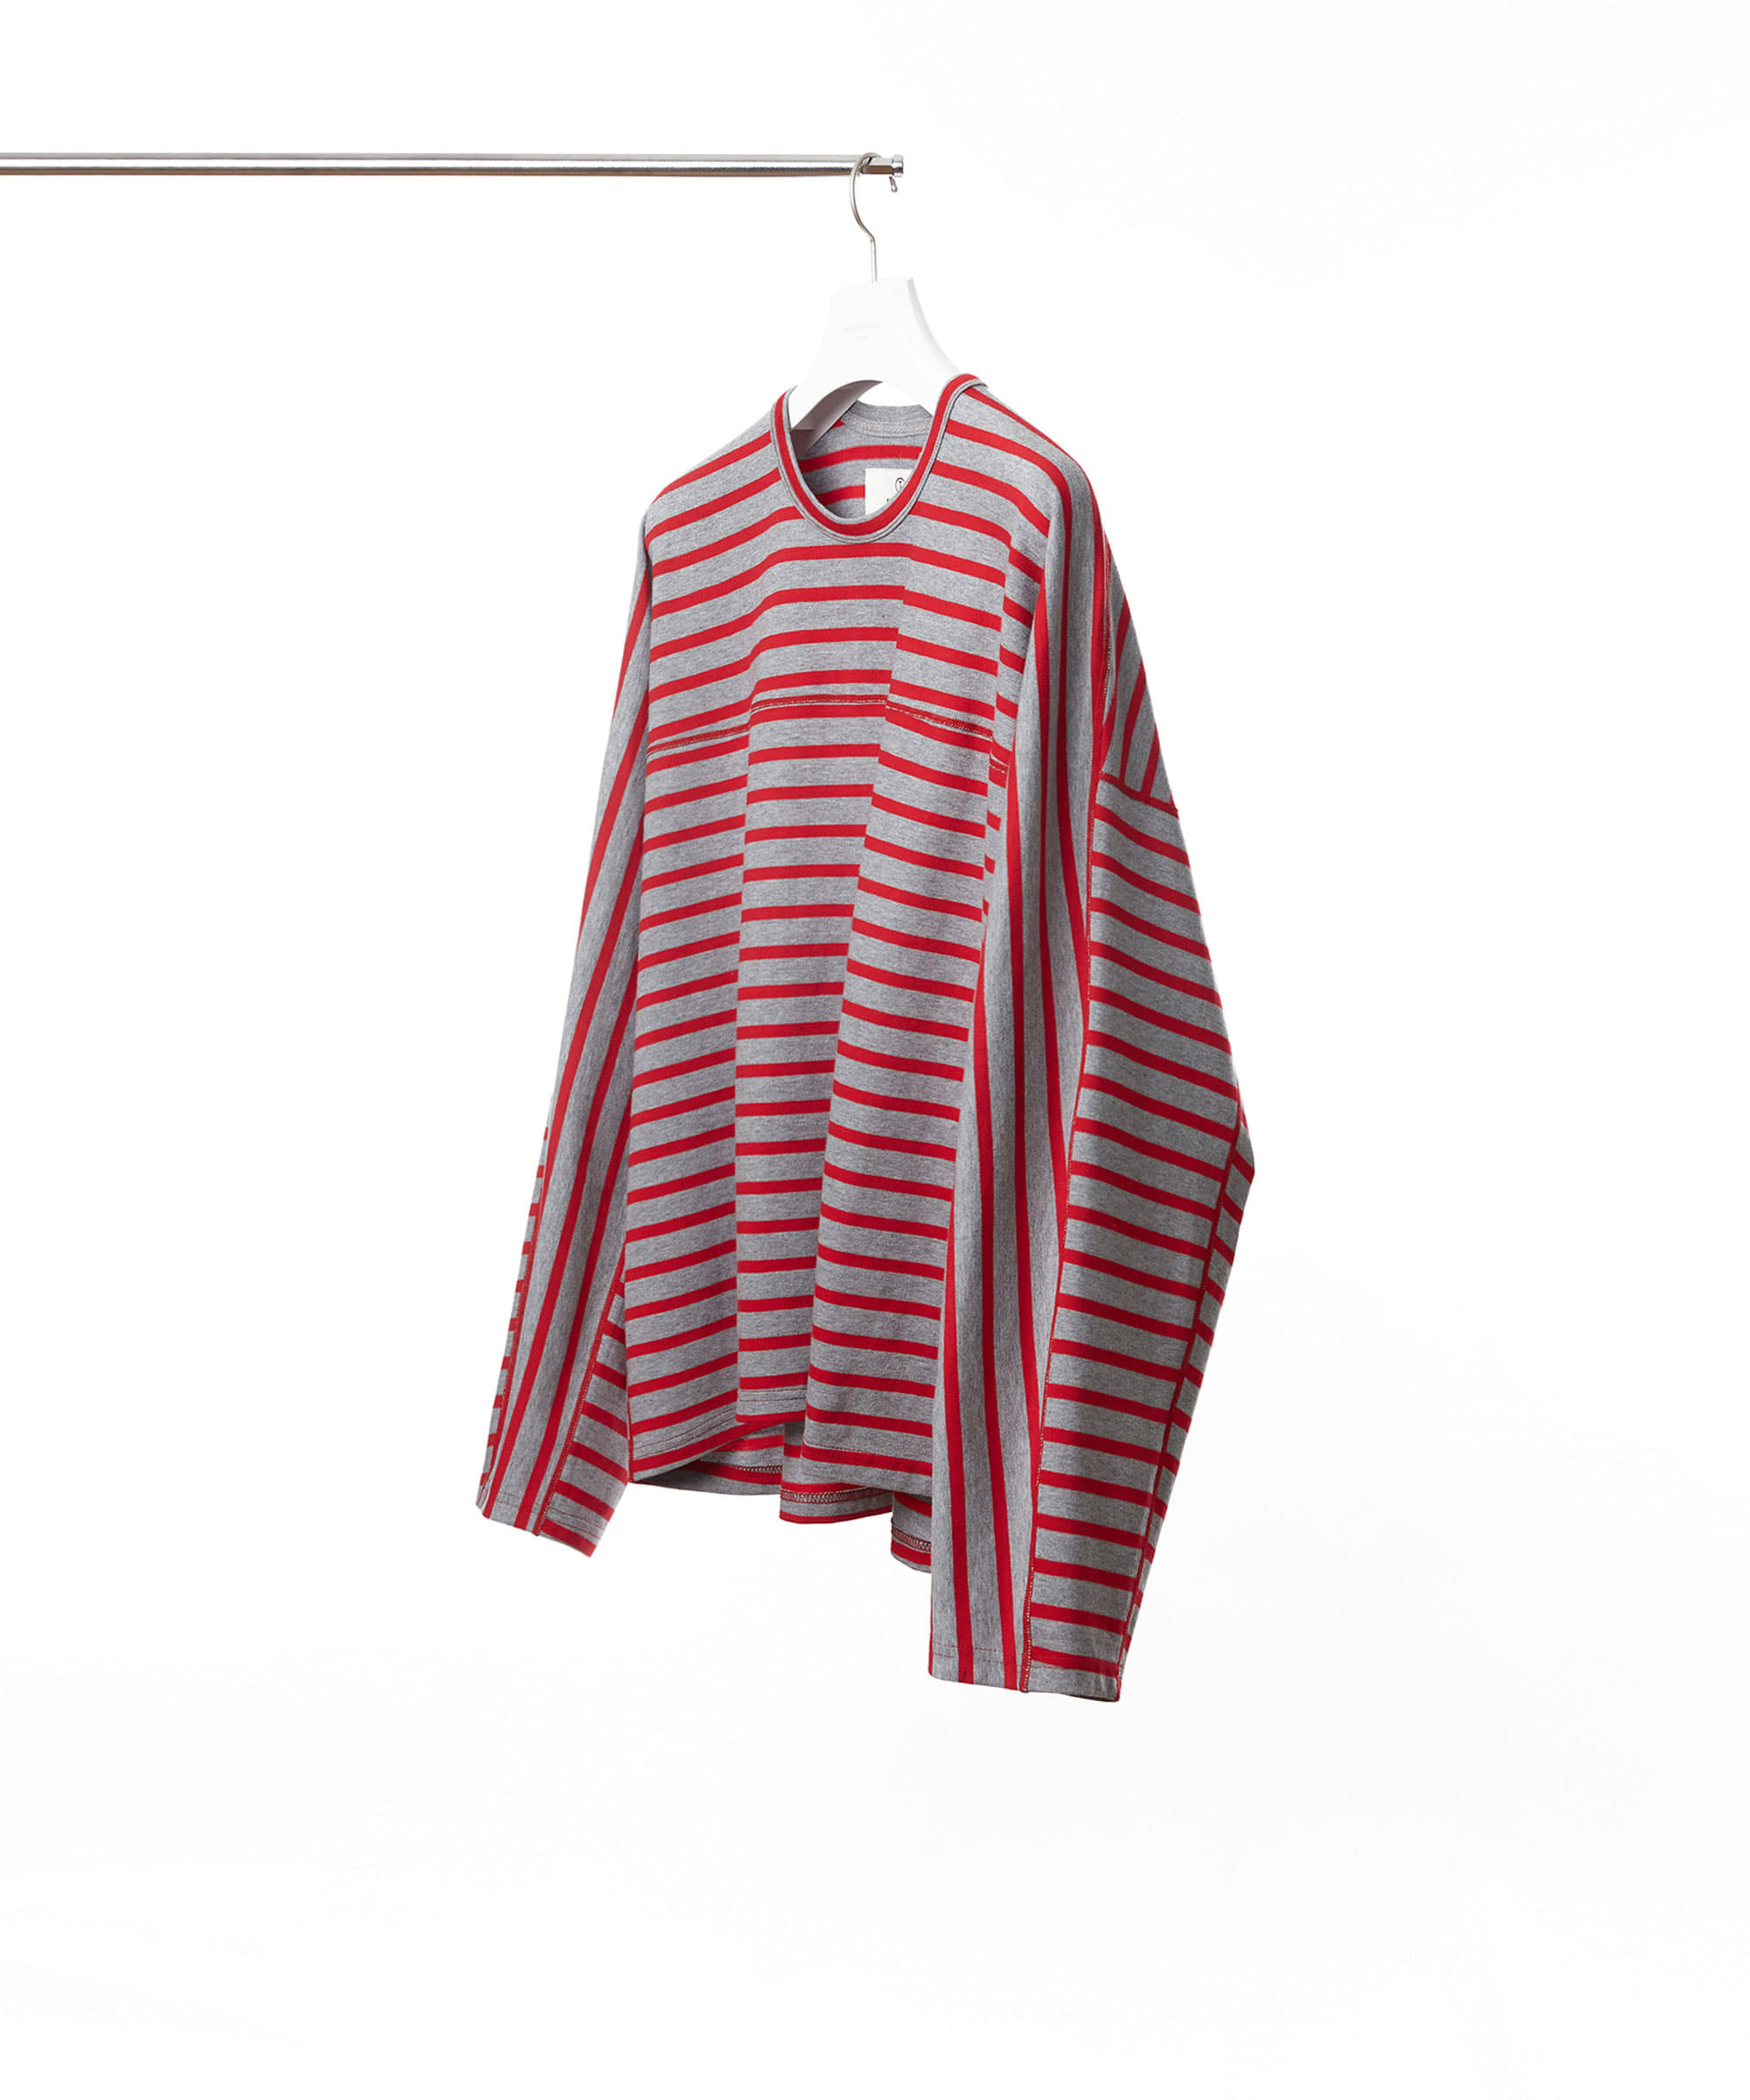 GREY/RED OVERSIZED COTTON BASQUE SHIRTS